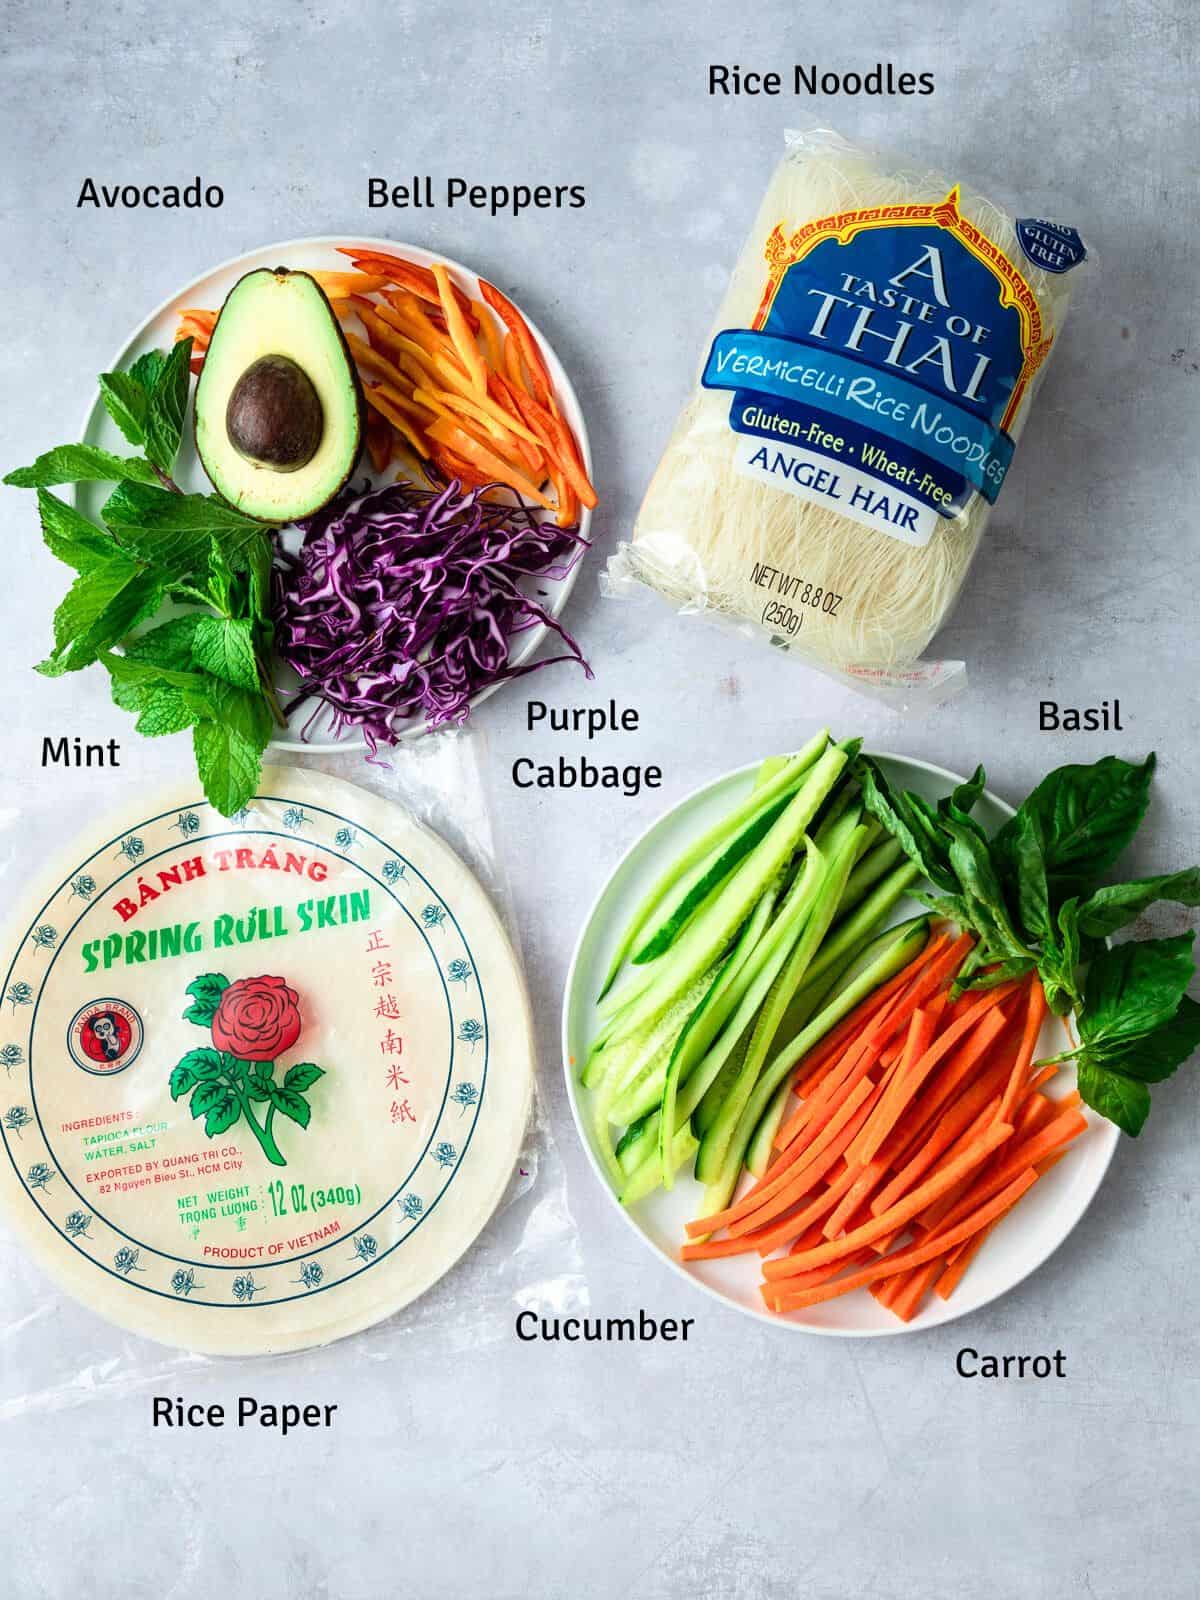 Ingredients for vegetable rice paper rolls, including avocado and rice noodles.